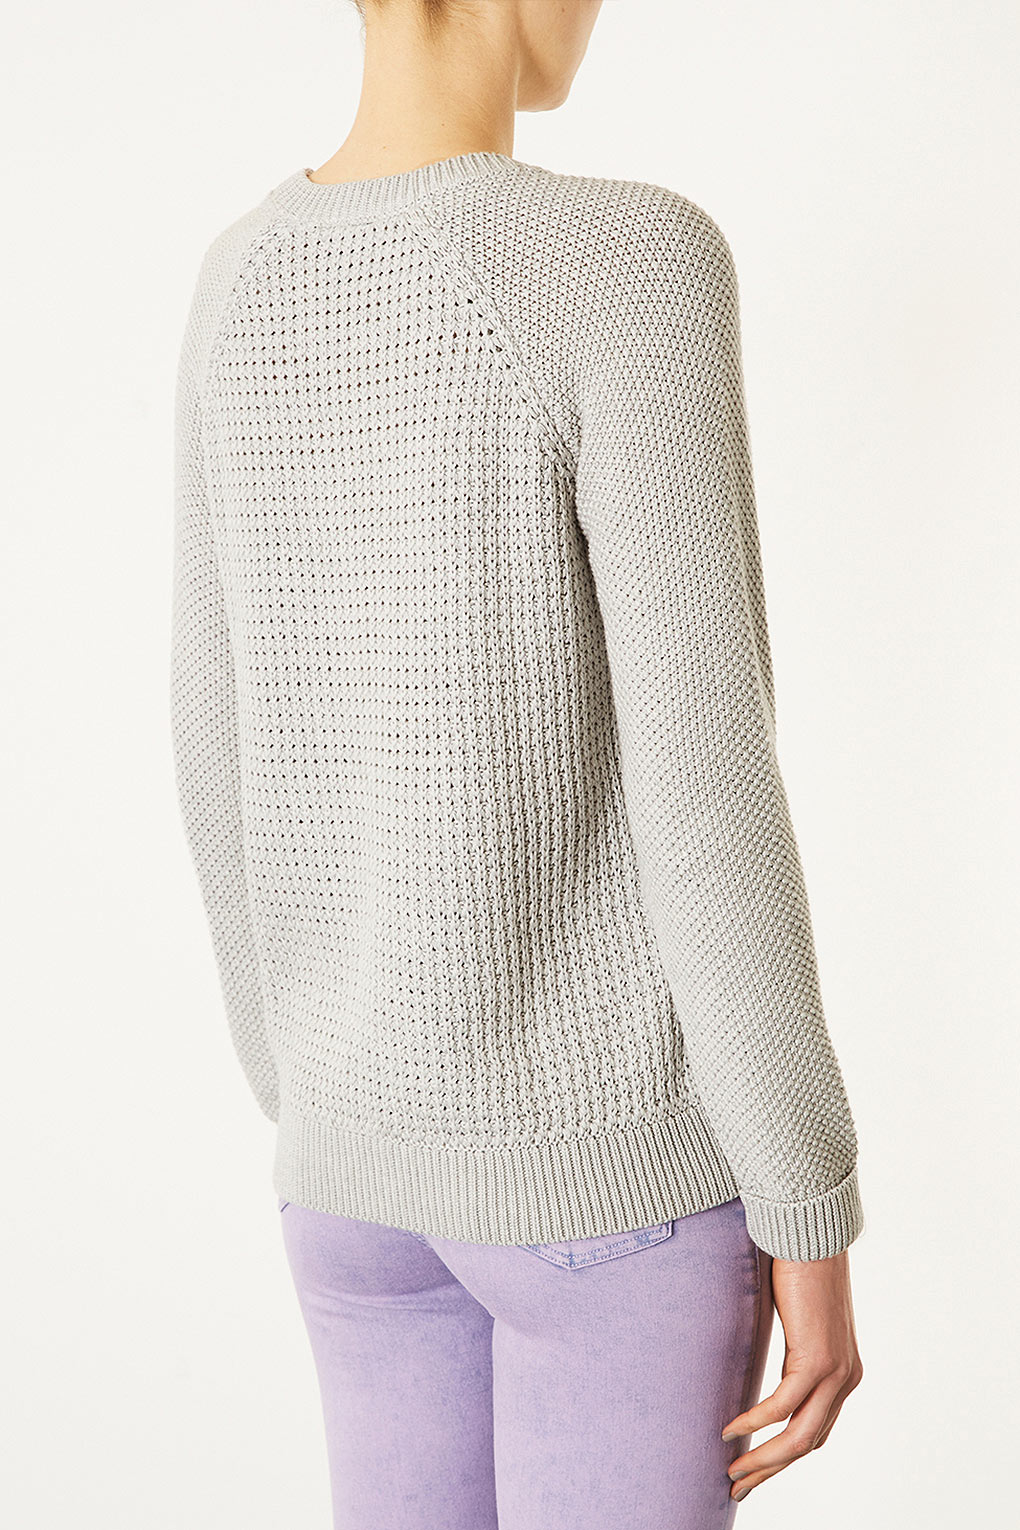 Topshop Knitted Scatter Front Jumper in Gray | Lyst